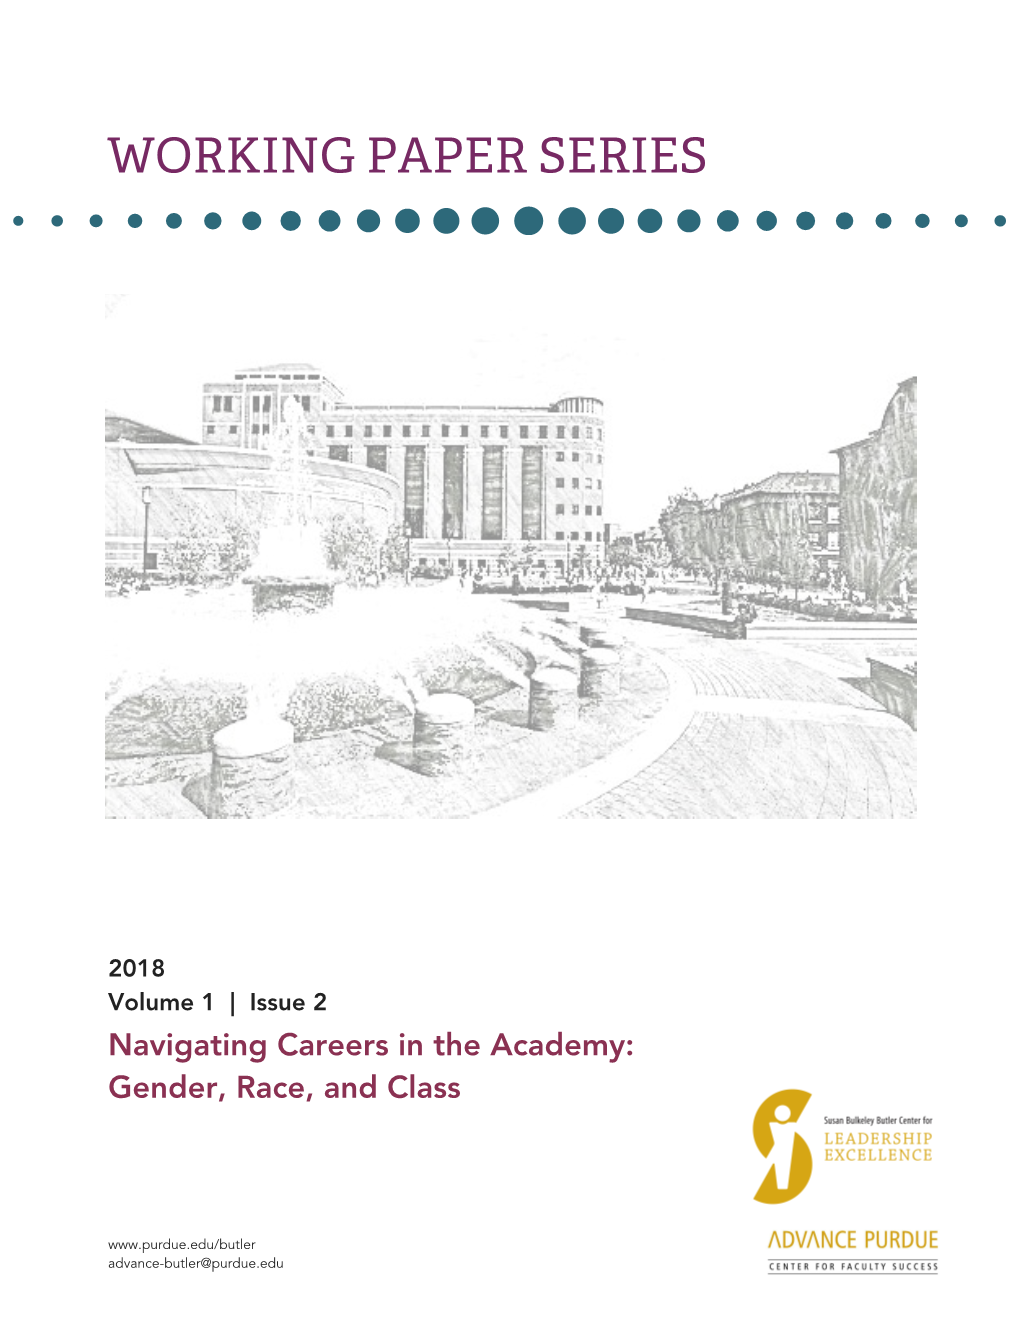 Working Paper Series Vol 1 Issue 2